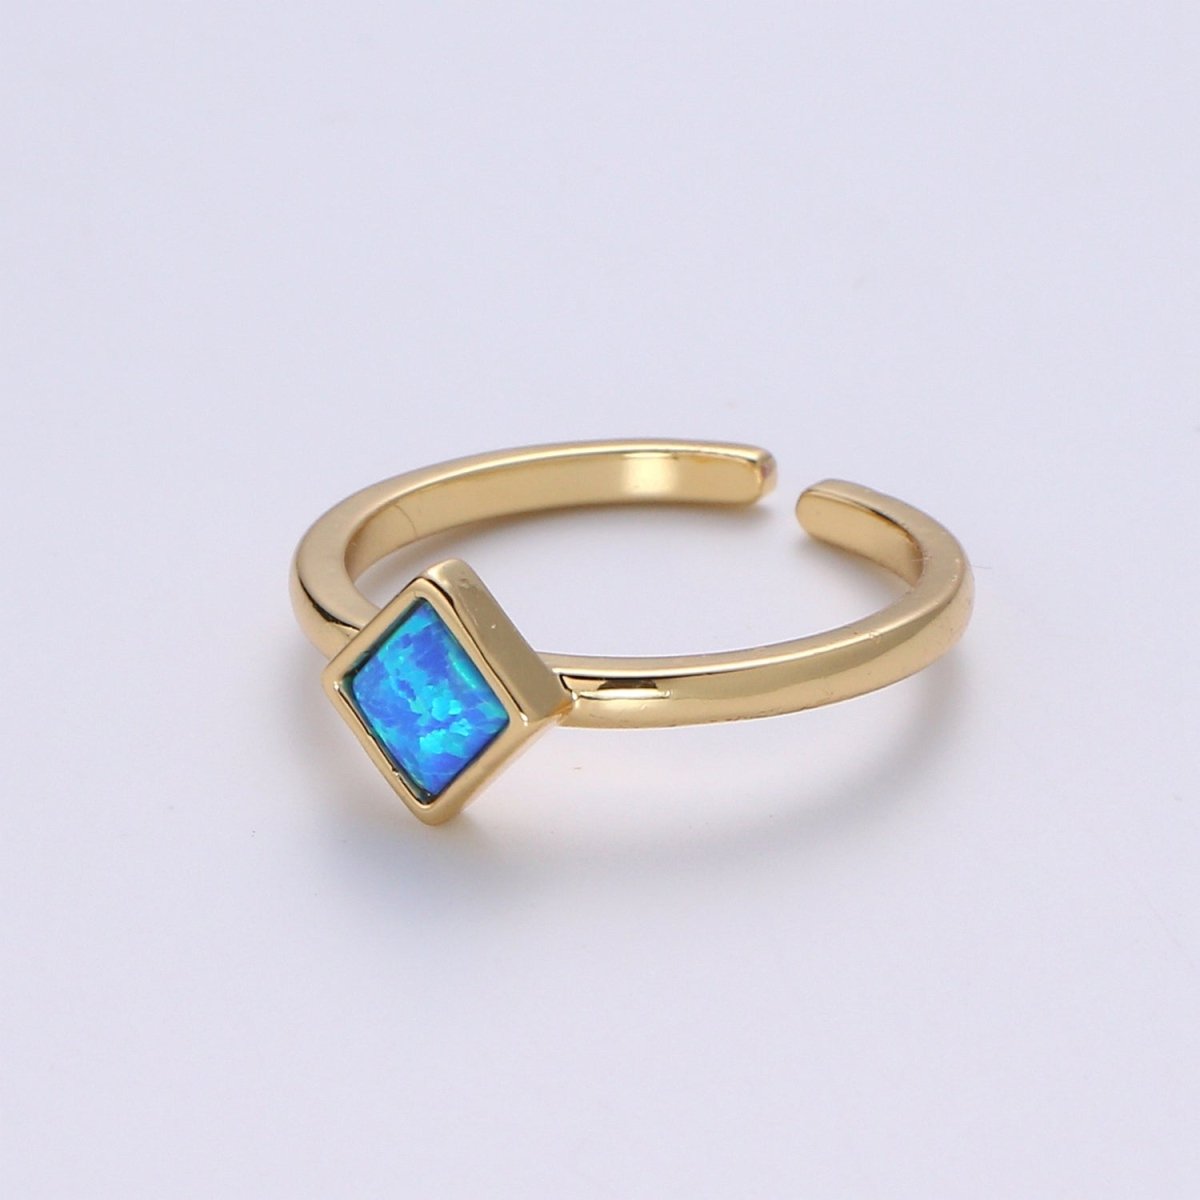 1pc 24K Gold Opal Simulated Ring,Diamond Cut Opal Lab Pendant Charm Ring, Solitaire White Opal Lab Square Design Band Jewelry R521 - DLUXCA